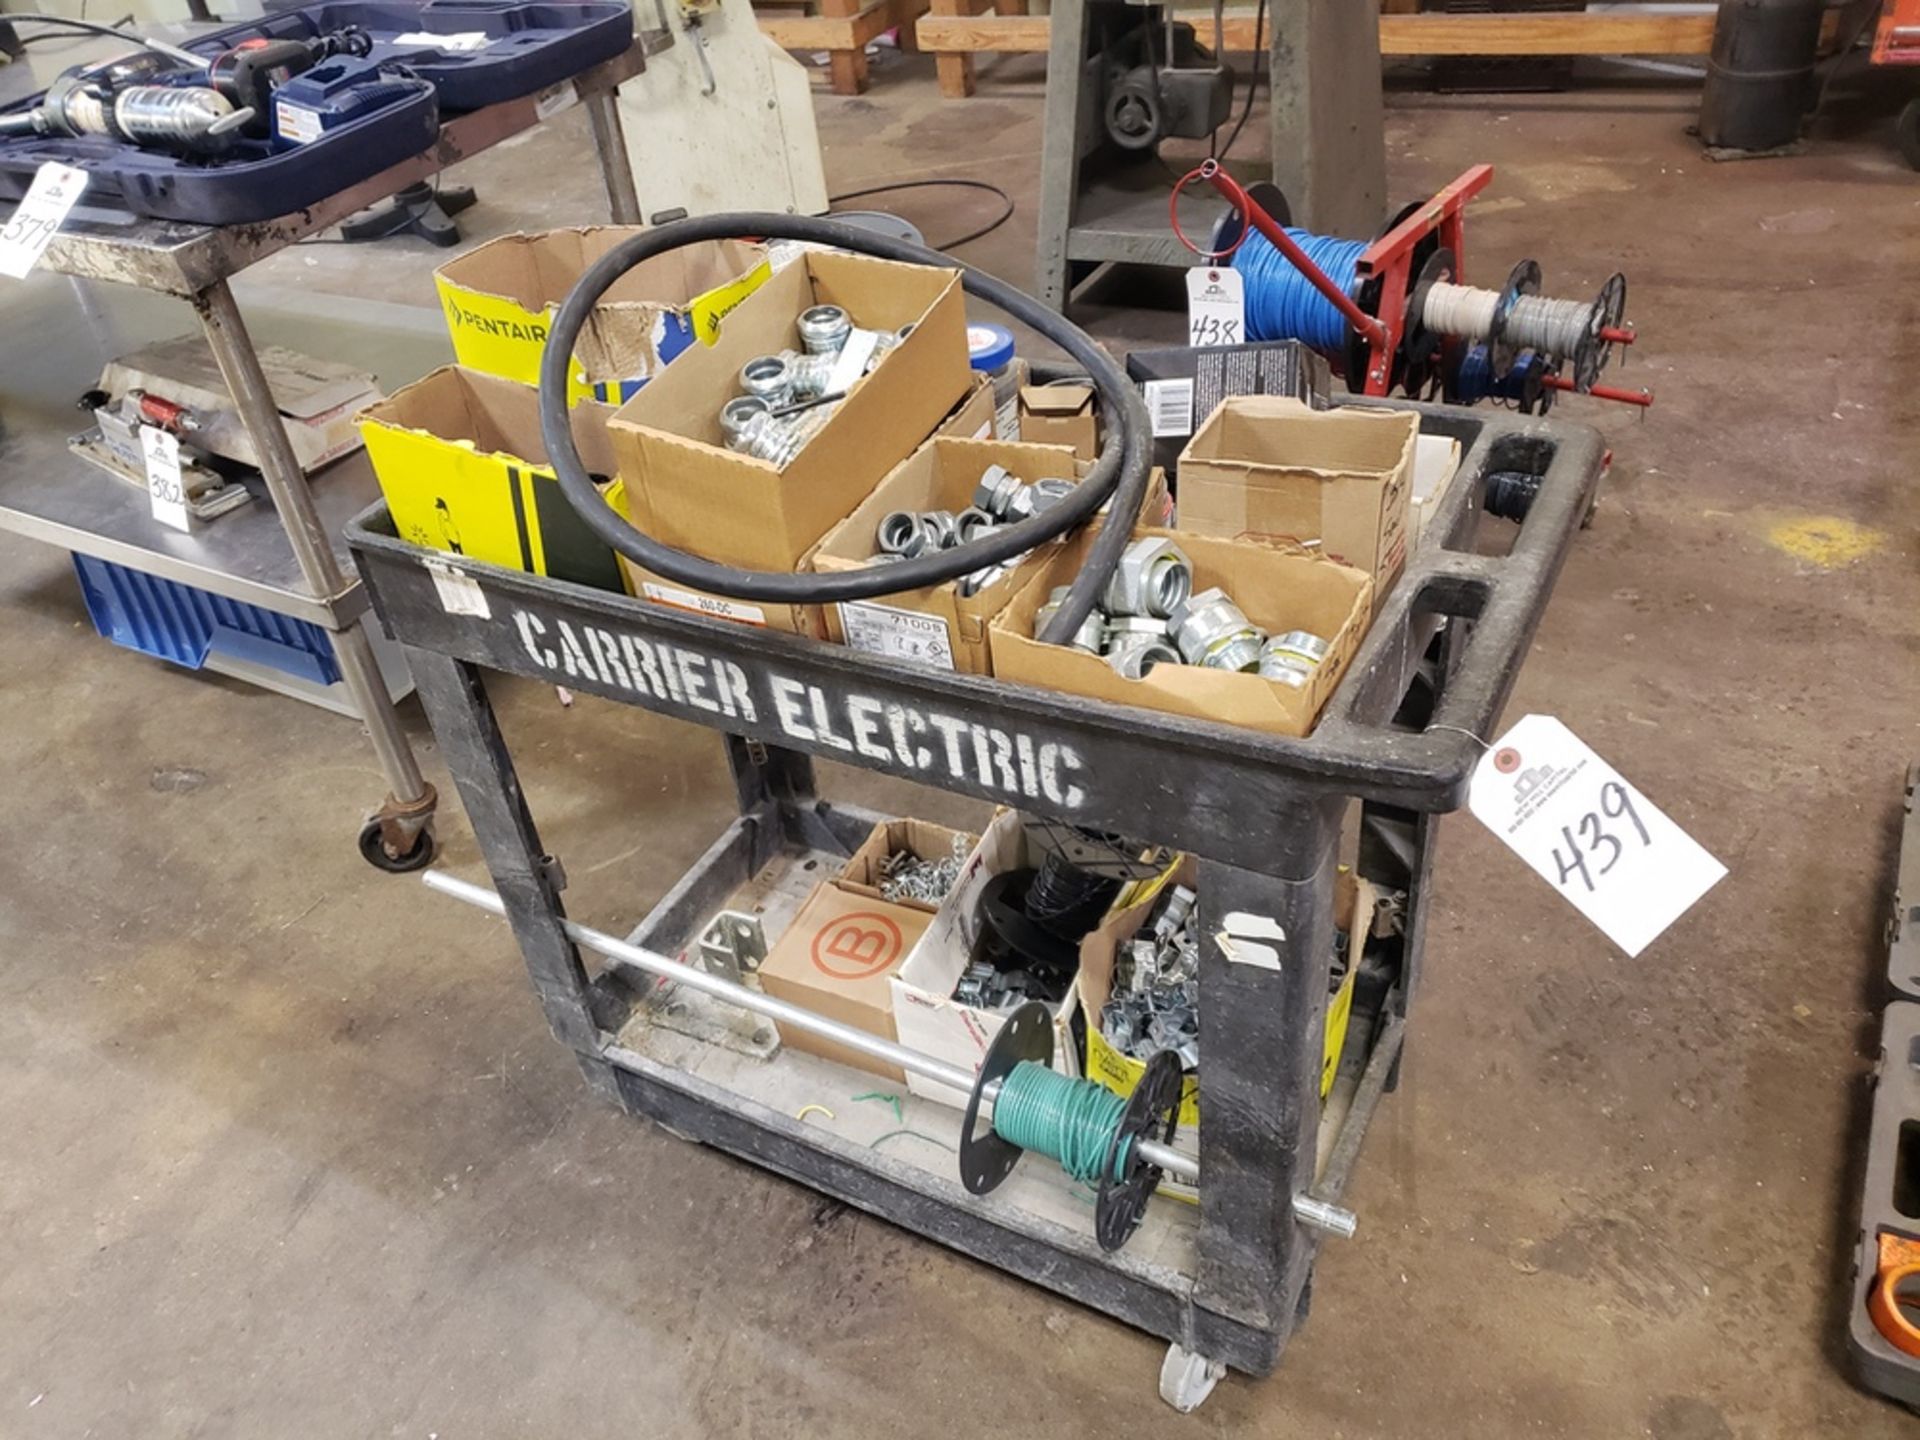 Shop Cart W/Contents, Electrical Supplies | Rig Fee: $10